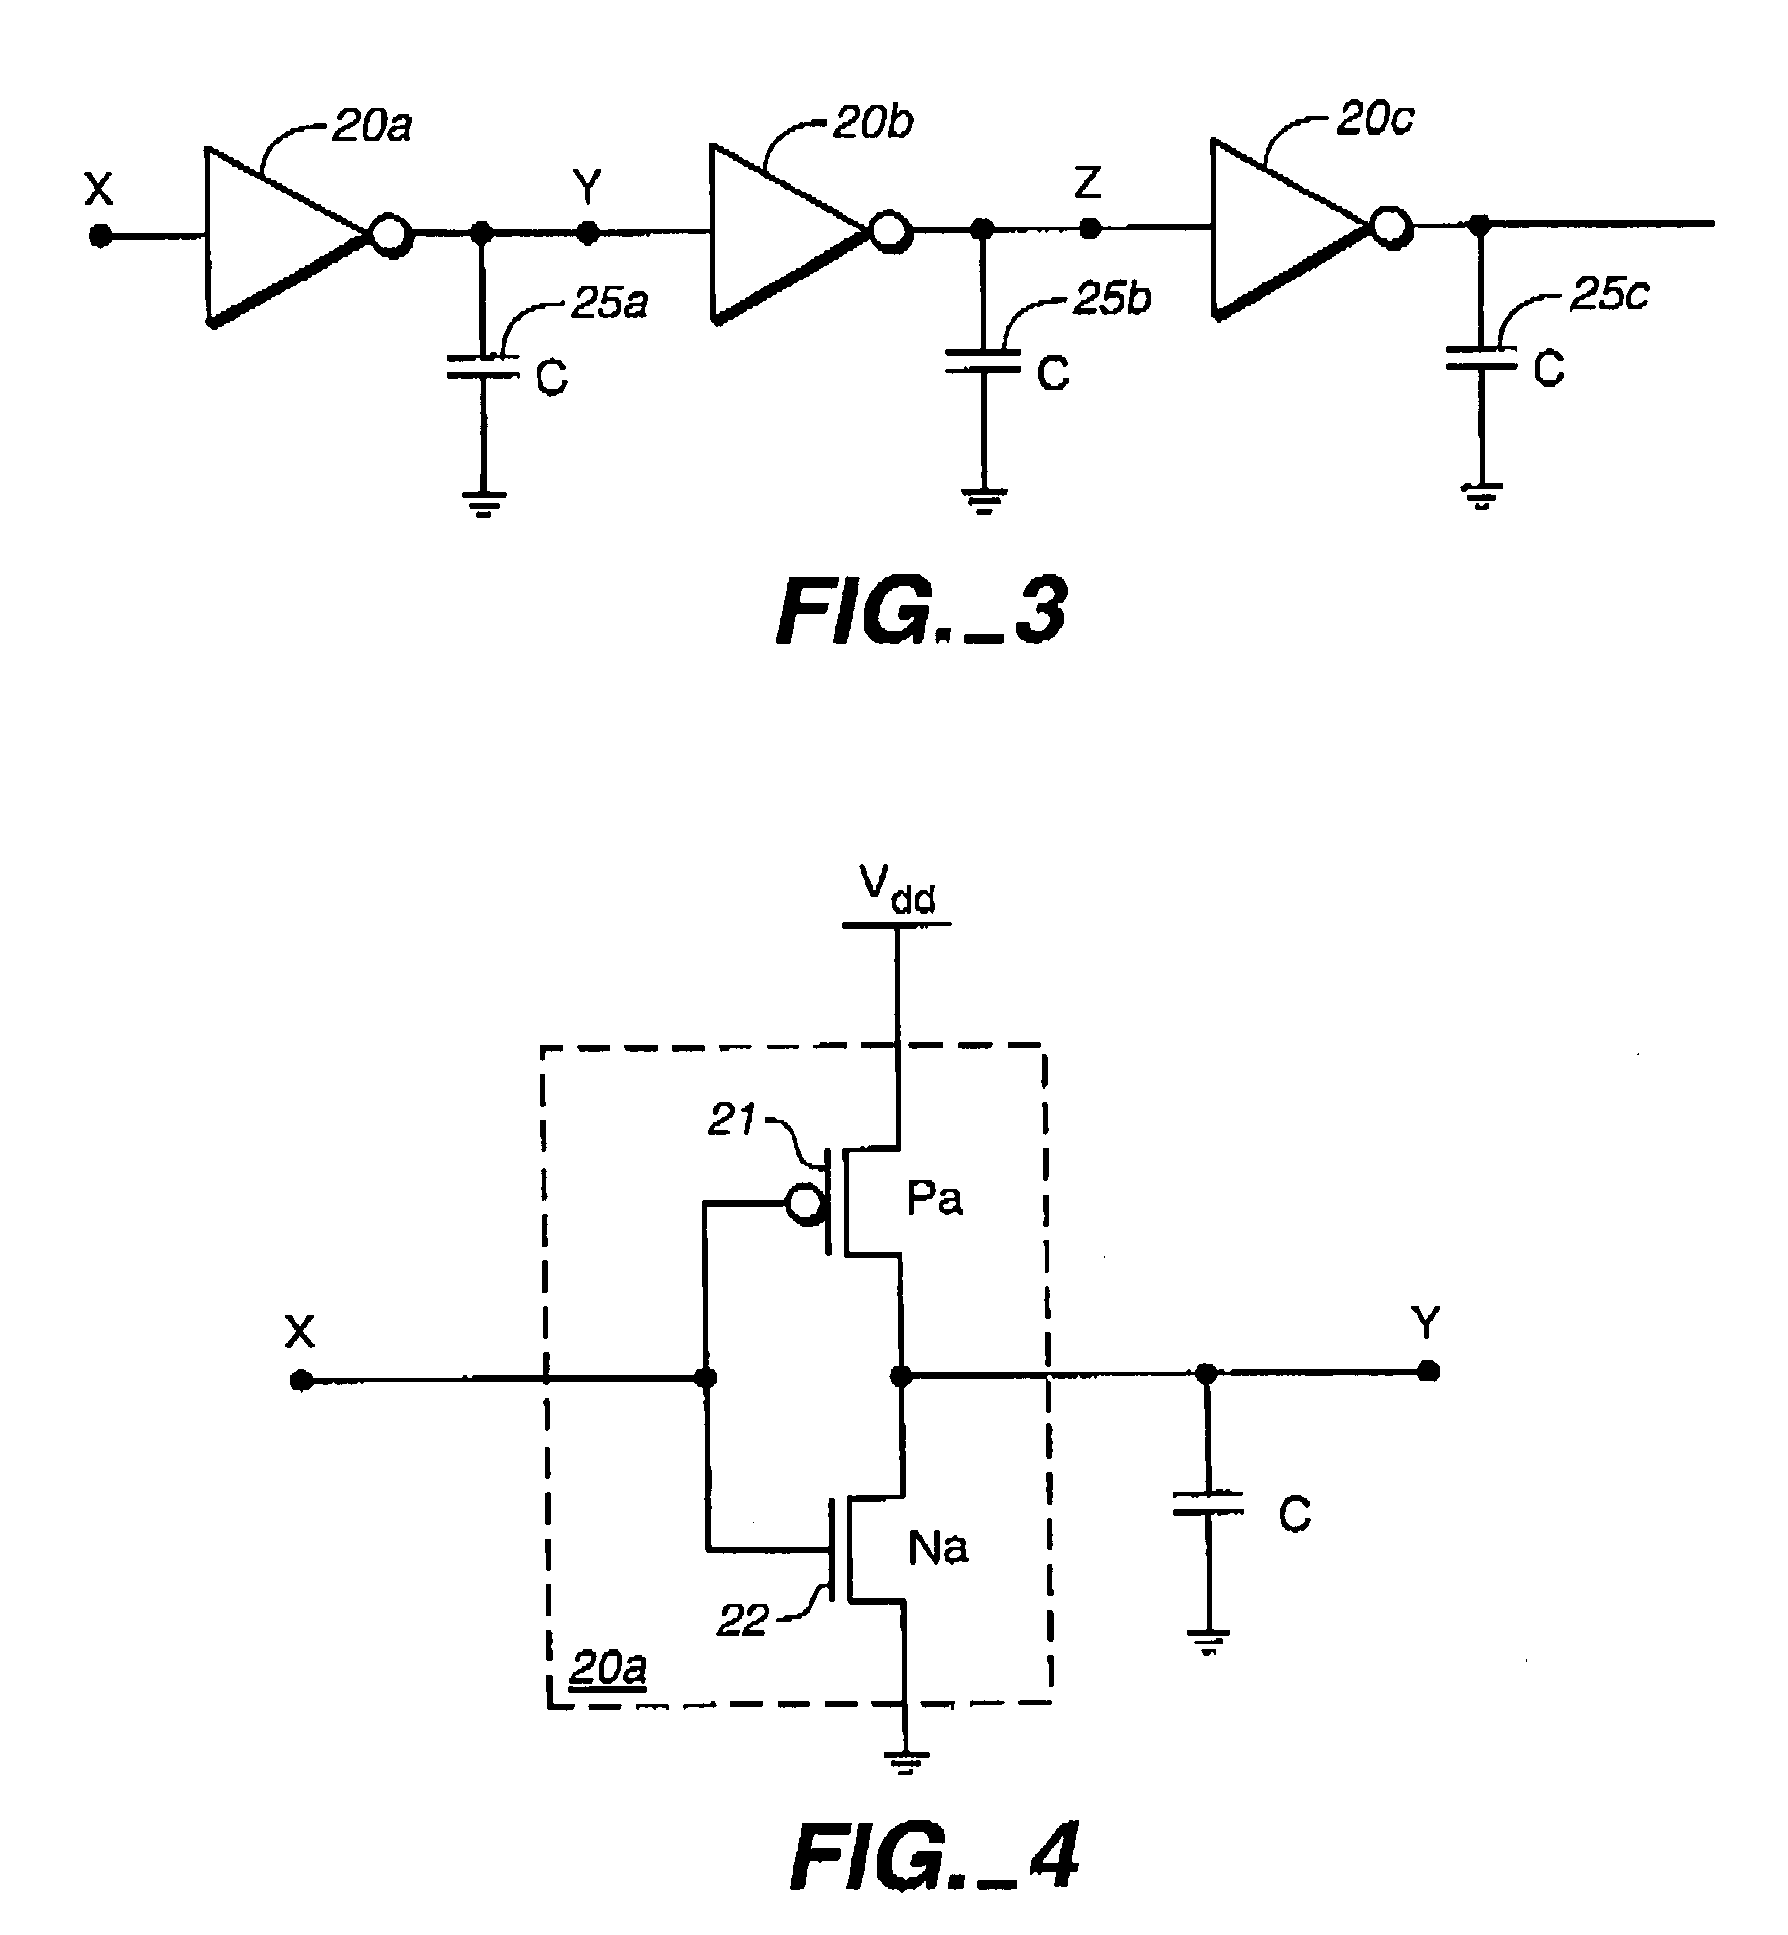 Hot carrier circuit reliability simulation